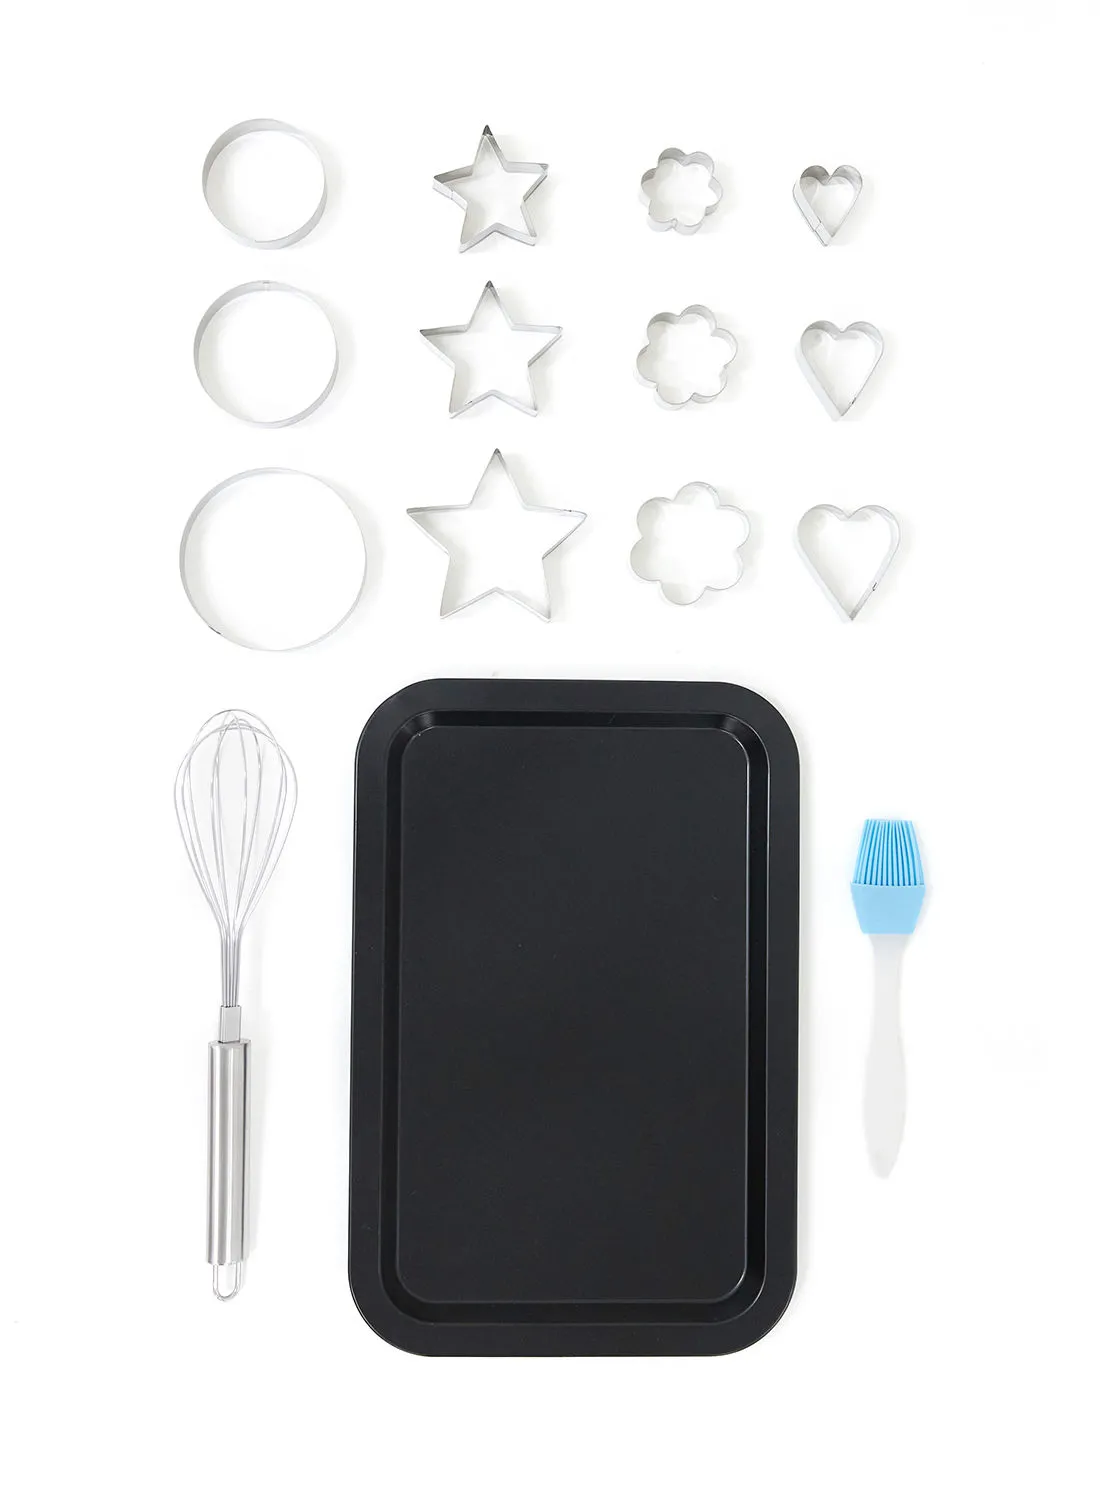 Noon East 15 Piece Oven Pan Set - Made Of Carbon Steel - Geometric Shapes - Baking Pan - Oven Trays - Cake Tray - Oven Pan - Black Black Geometric Shapes